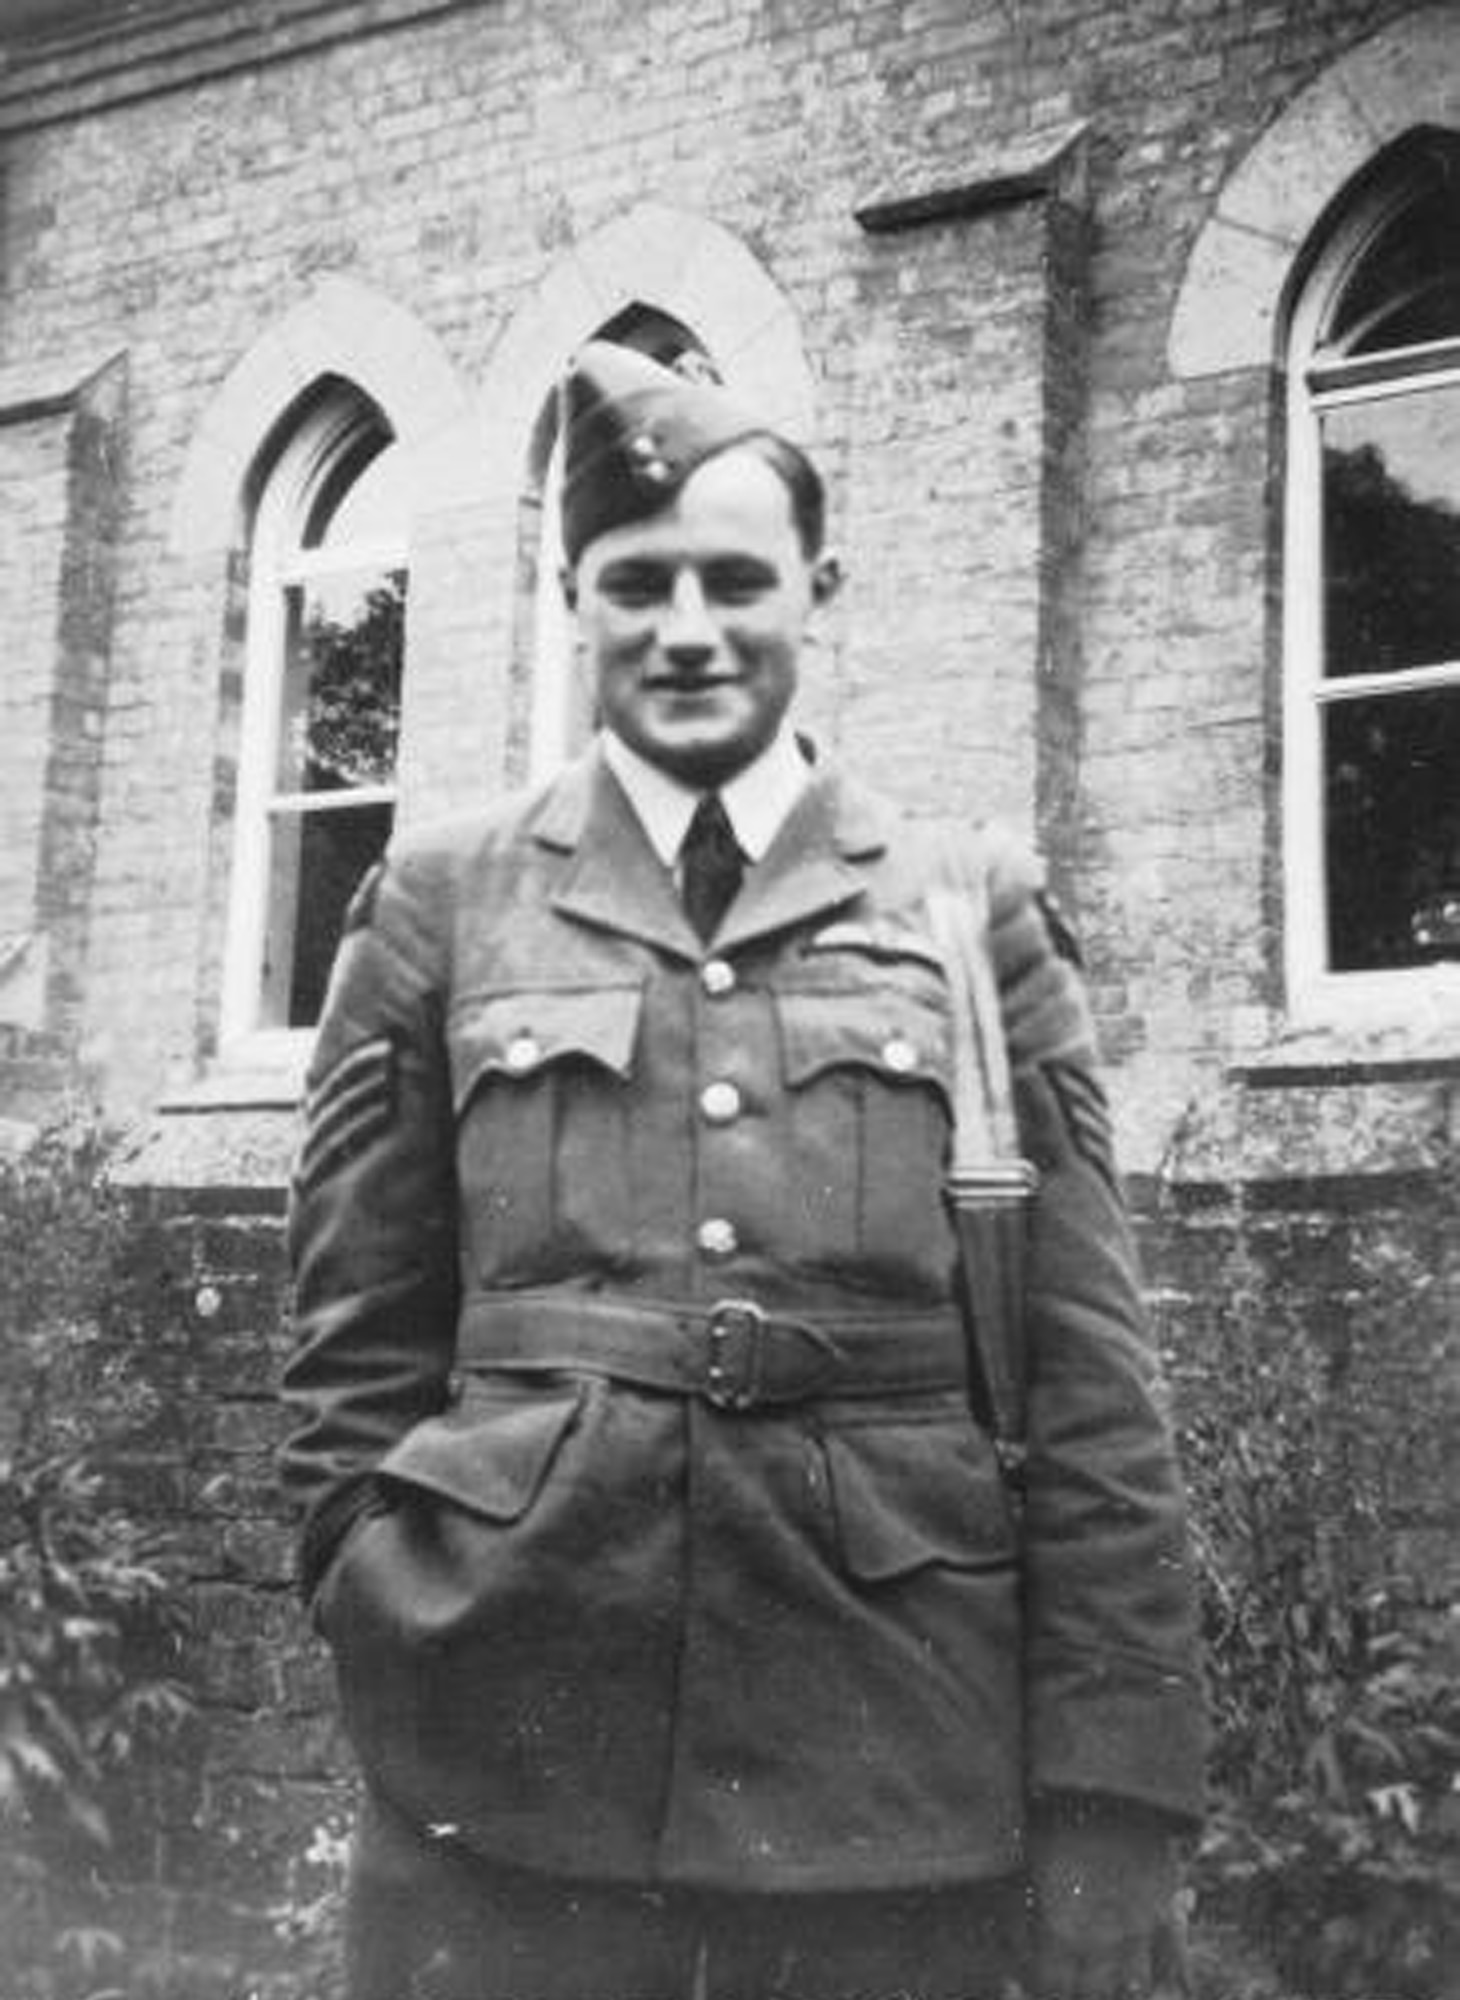 ROYAL AIR FORCE FELTWELL, England -- Photo of Sgt. James A. Ward, in front of a church at Hockwold, England, was the first New Zealander awarded the Victoria Cross; the British equivalent of the Medal of Honor. Sergeant Ward was stationed at RAF Feltwell with the Royal New Zealand Air Force No. 75 Squadron during World War II. He was awarded the medal for his heroic actions on July 7, 1941, when his Wellington bomber caught fire from an enemy attack. (Courtesy photo)